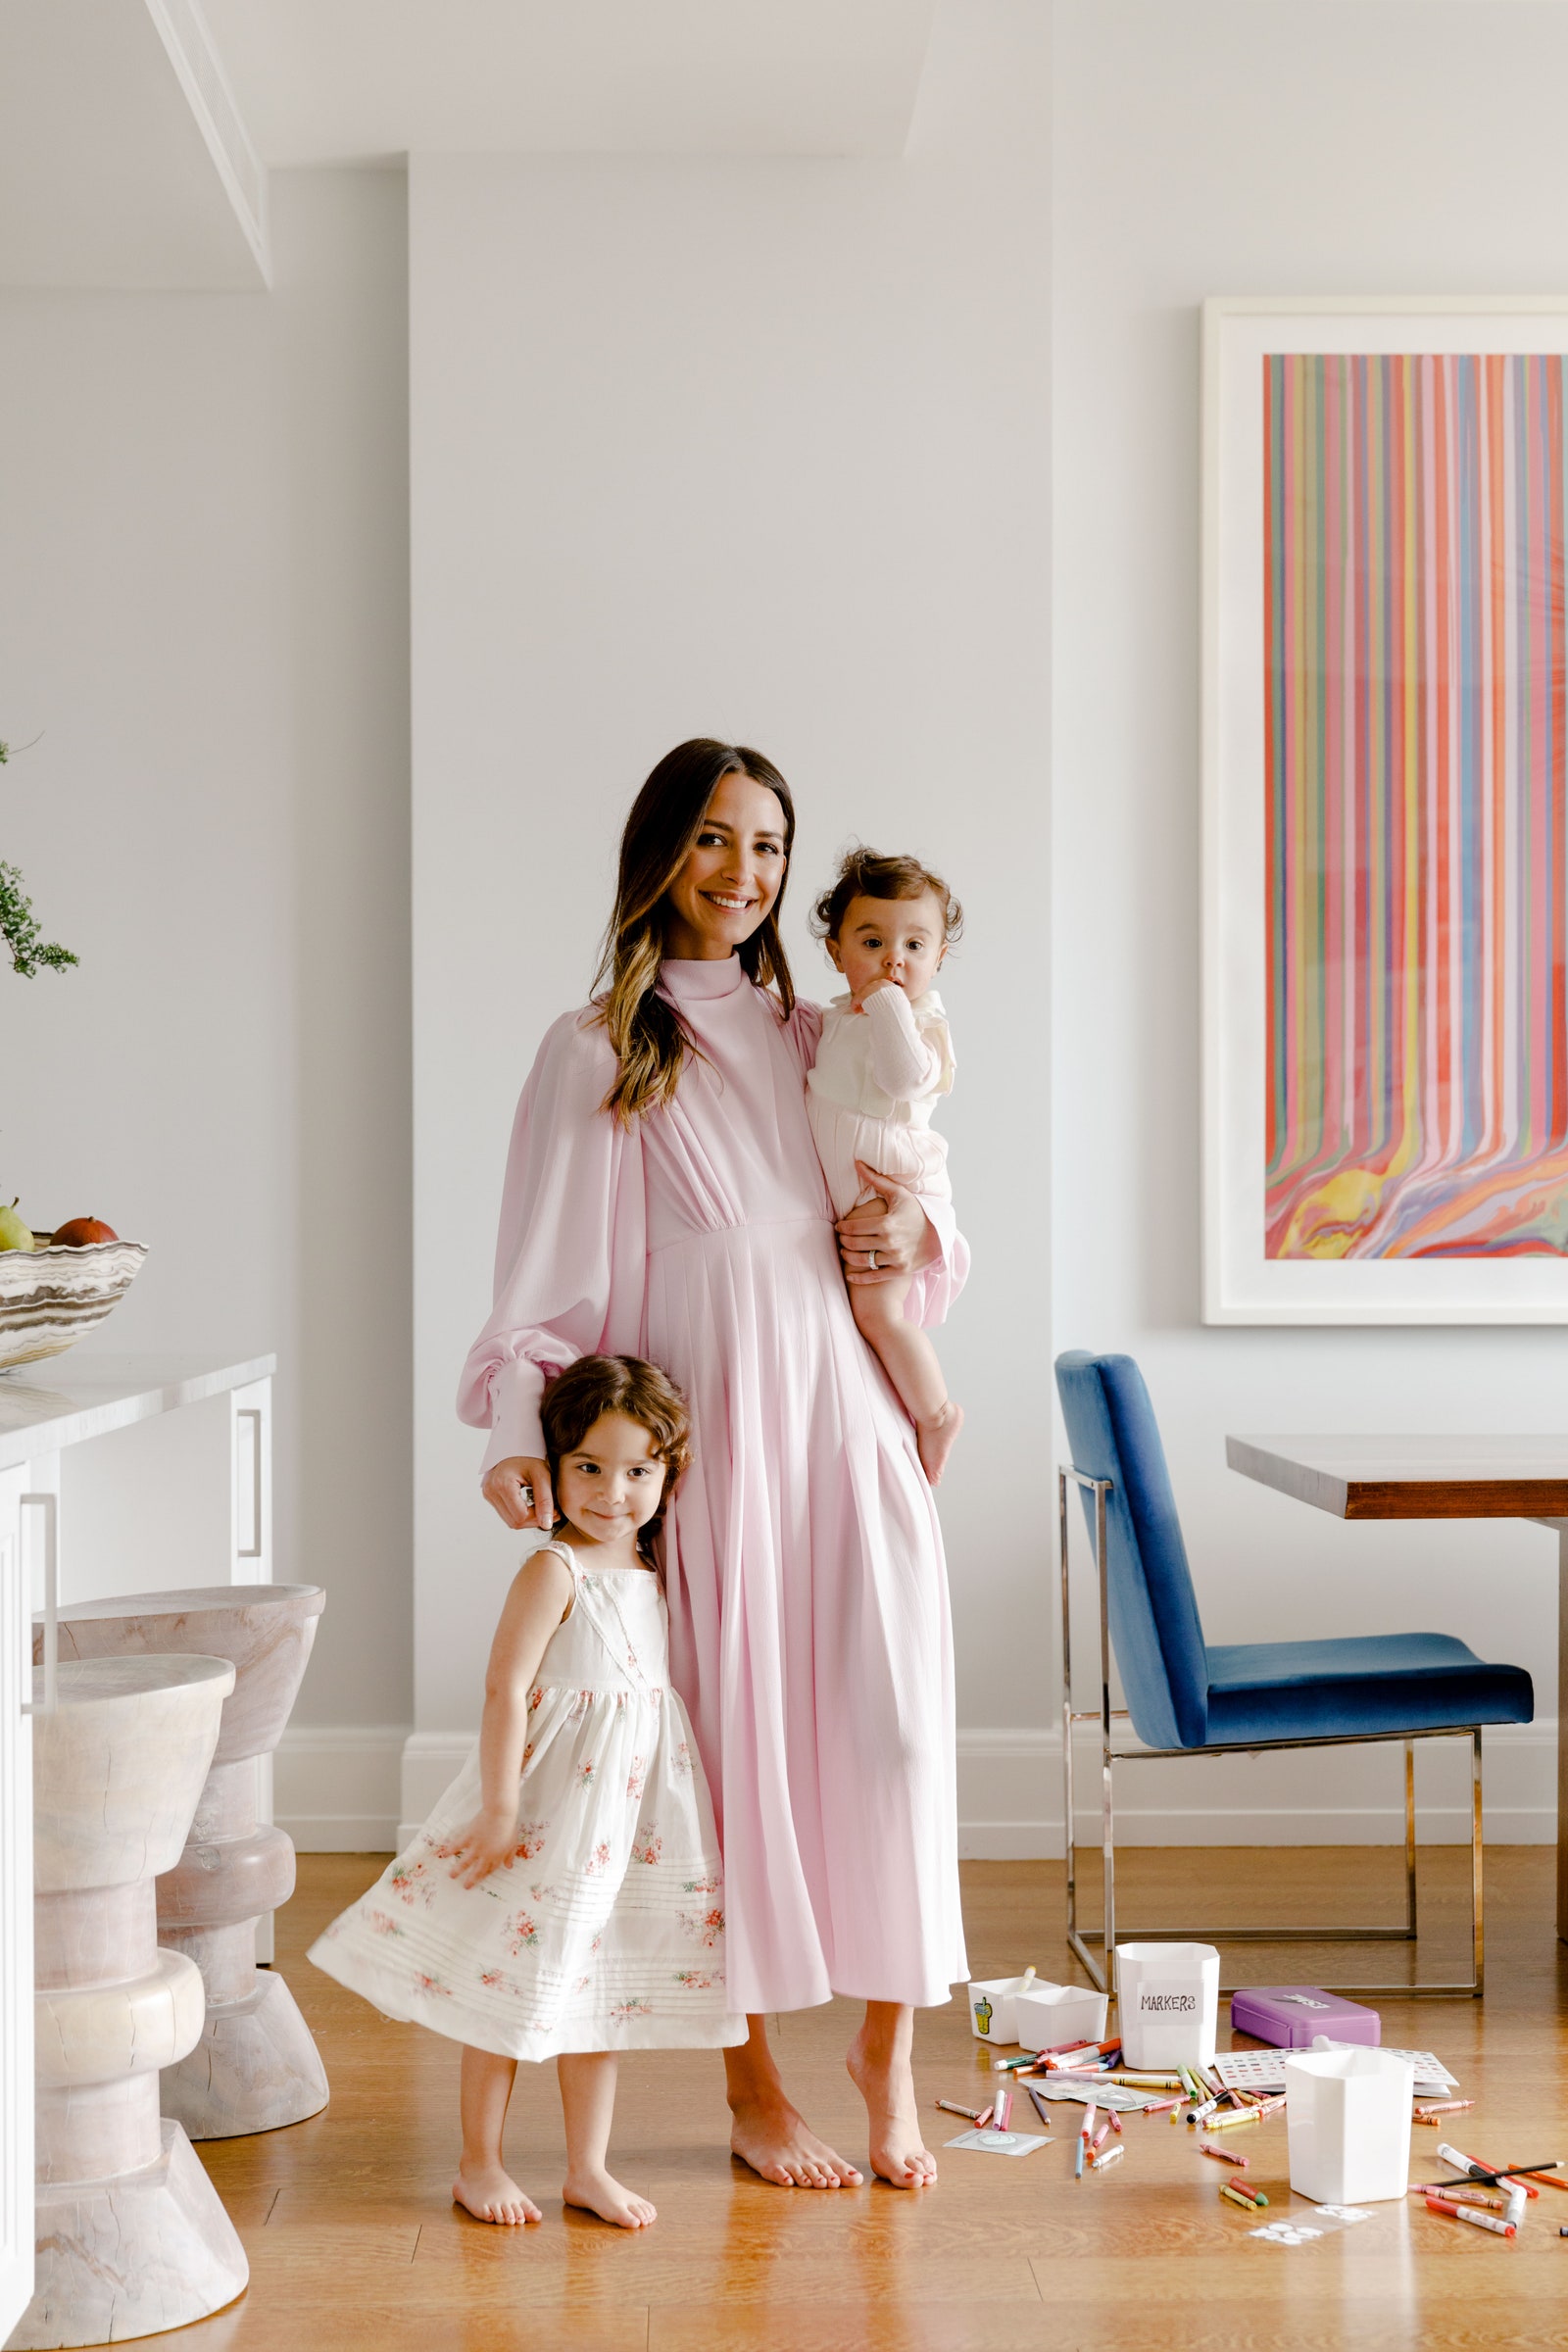 Arielle Charnas’s Inspired New York Apartment